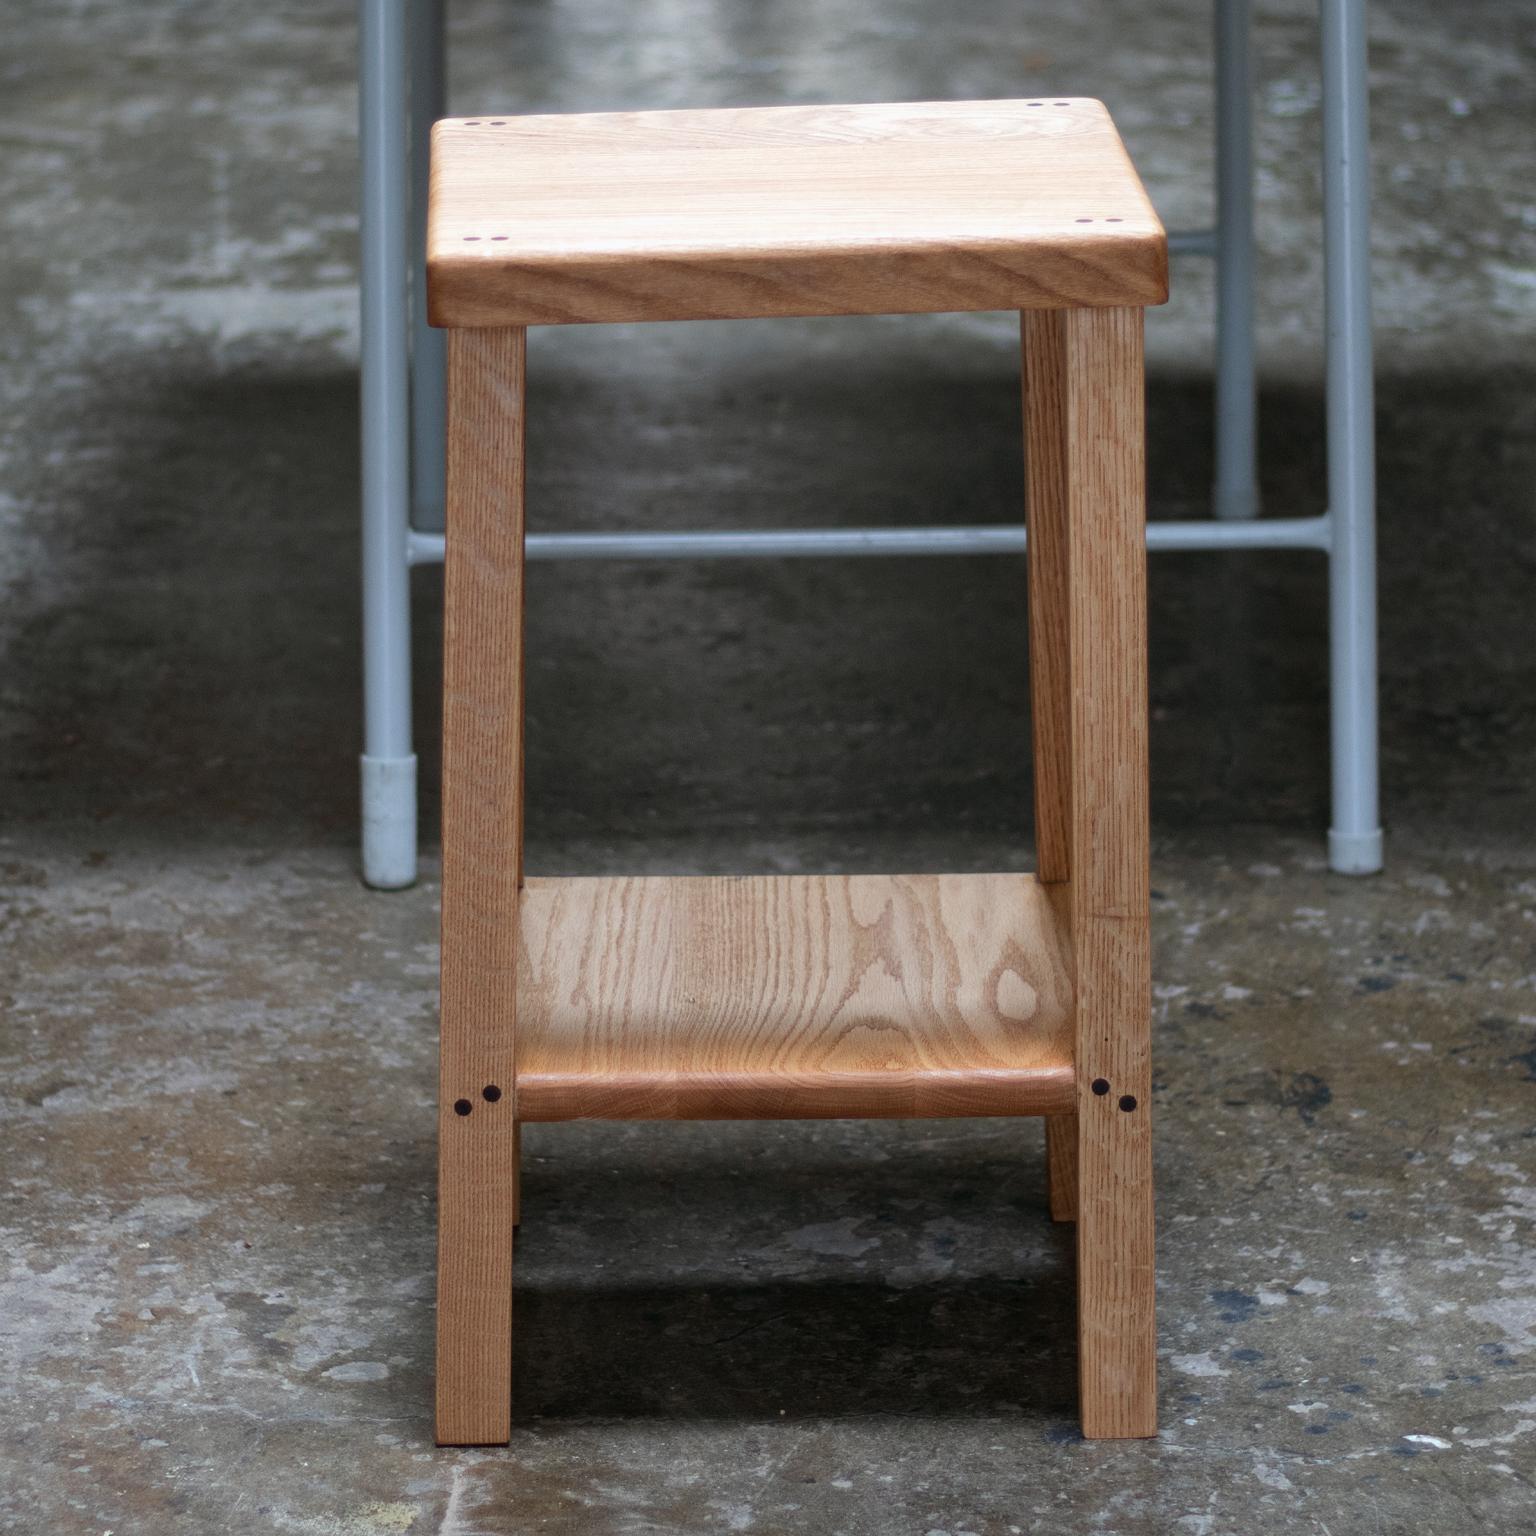 This bar stool features thick stock walnut seat and solid oak frame. 
Using walnut dowel joinery, these stools balance heft and elegance.
These stools are substantial pieces with subtle details, quality construction, and high design.

Finished